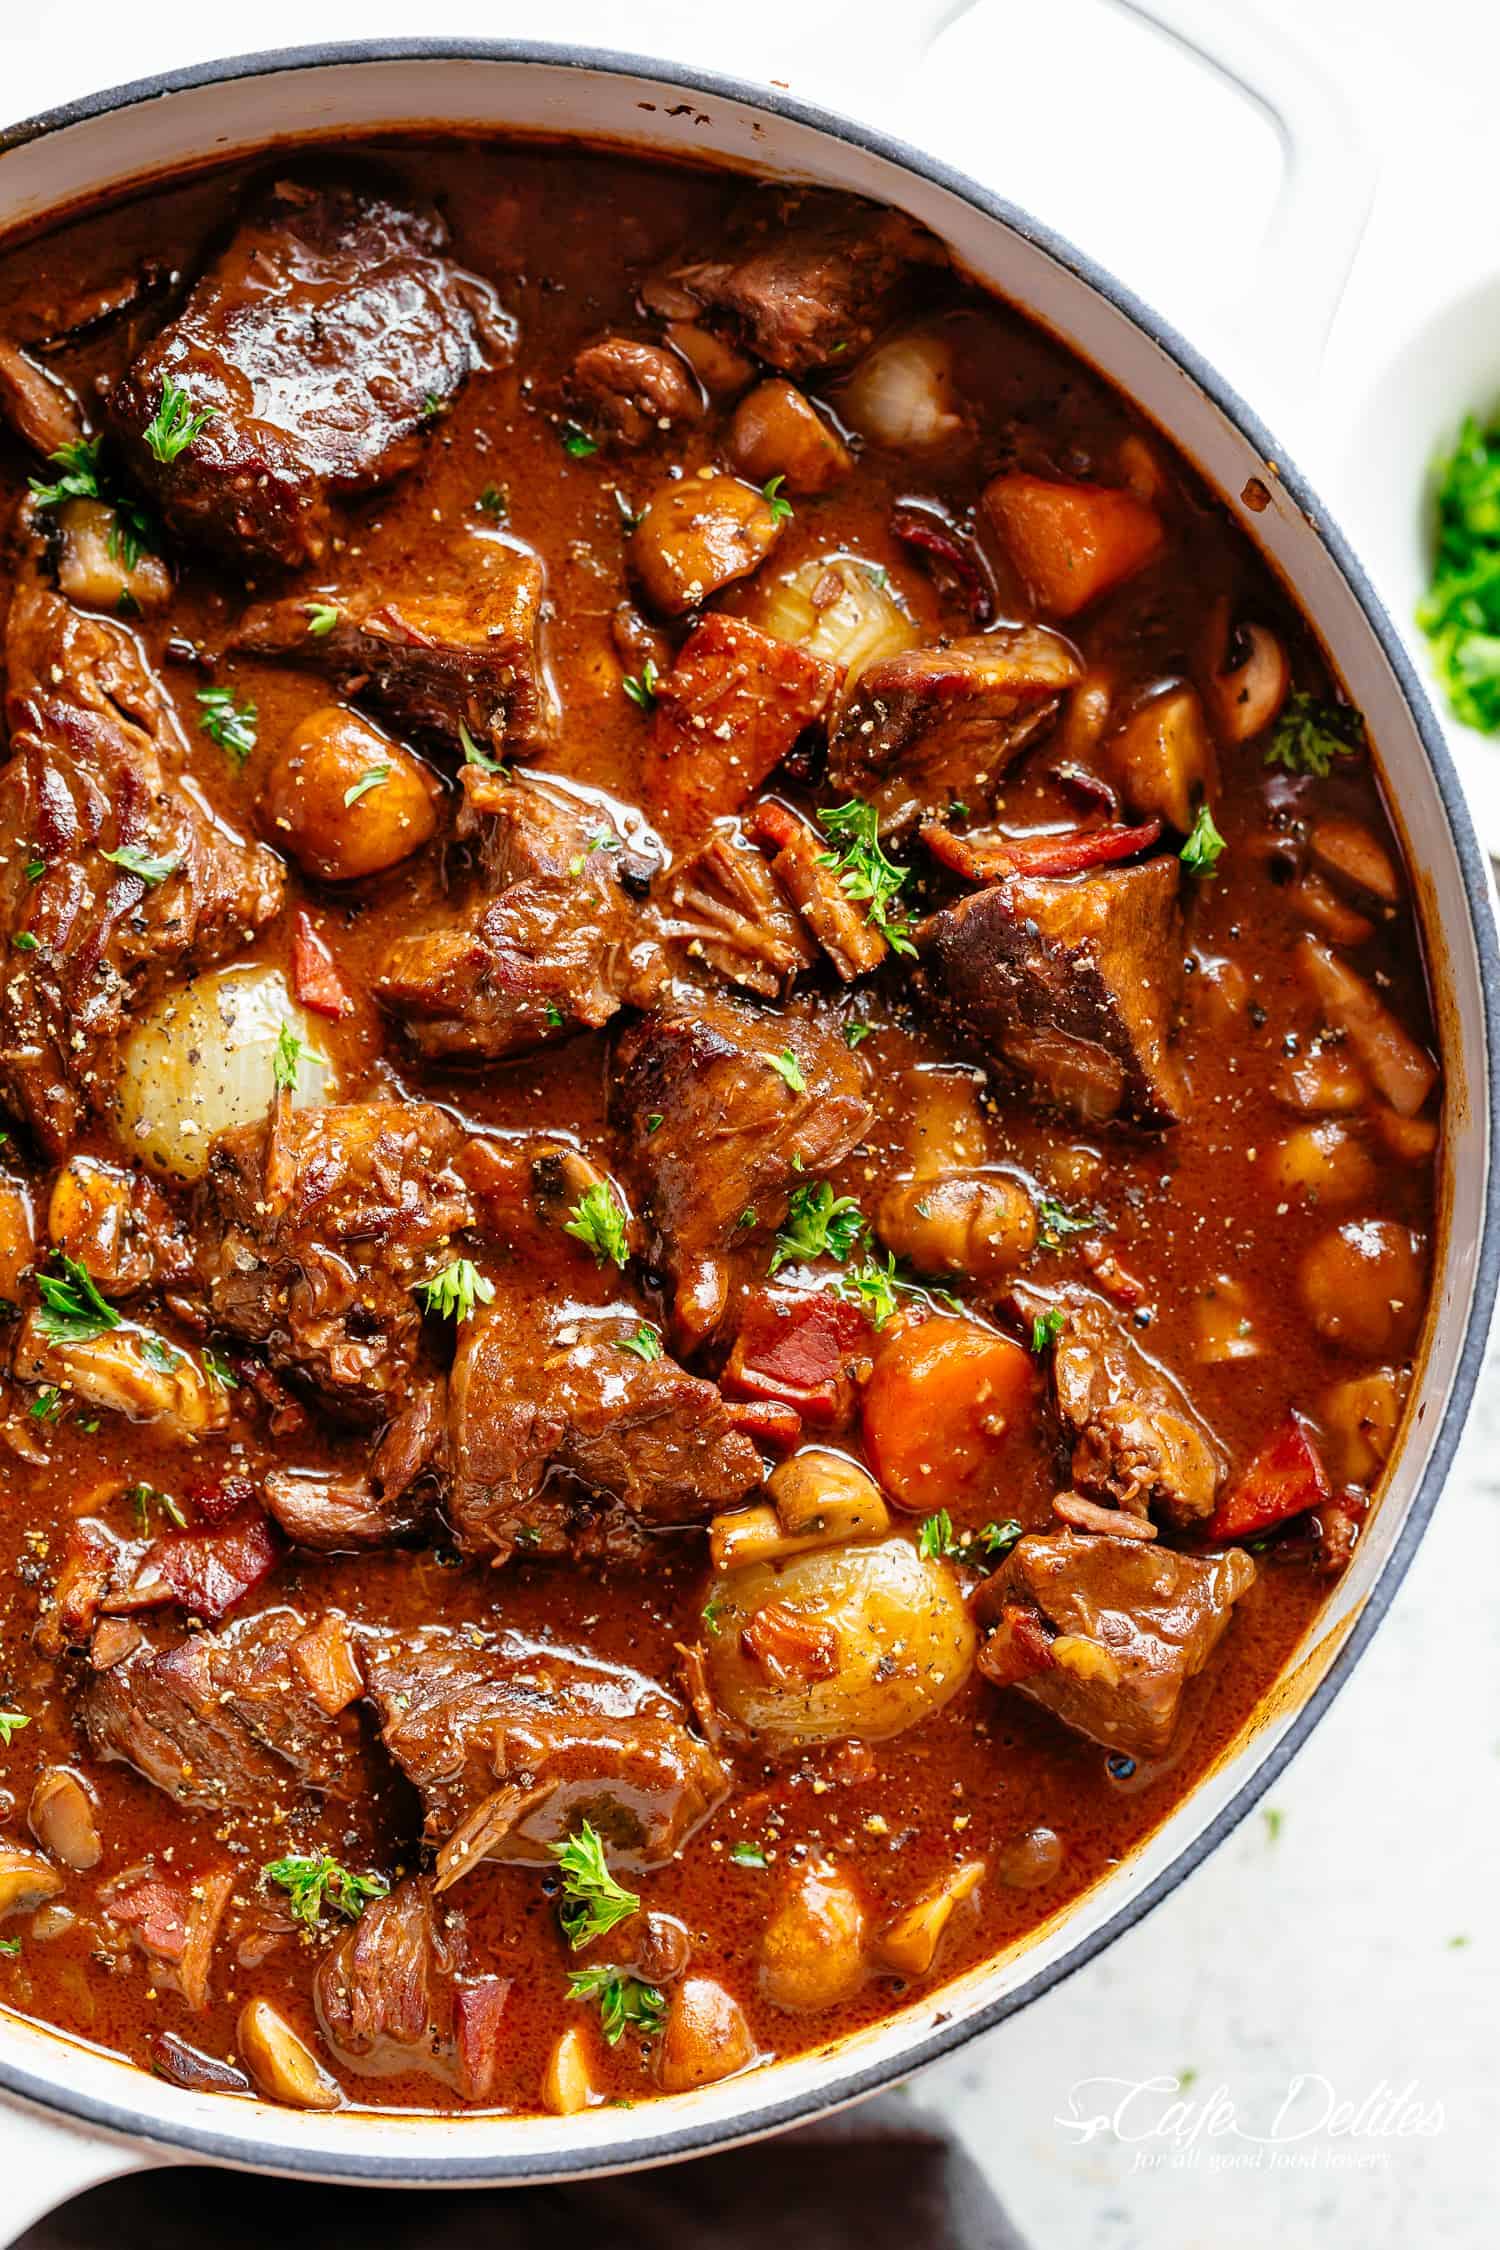 Tender fall apart chunks of beef simmered in a white cast iron casserole dish against a white background. Simmered in a rich red wine gravy, Julia Child's Beef Bourguignon an incredible family dinner. Slow Cooker, Instant Pot/Pressure Cooker, Stove Top and the traditional Oven method included! Easy to make, every step is worth it | cafedelites.com